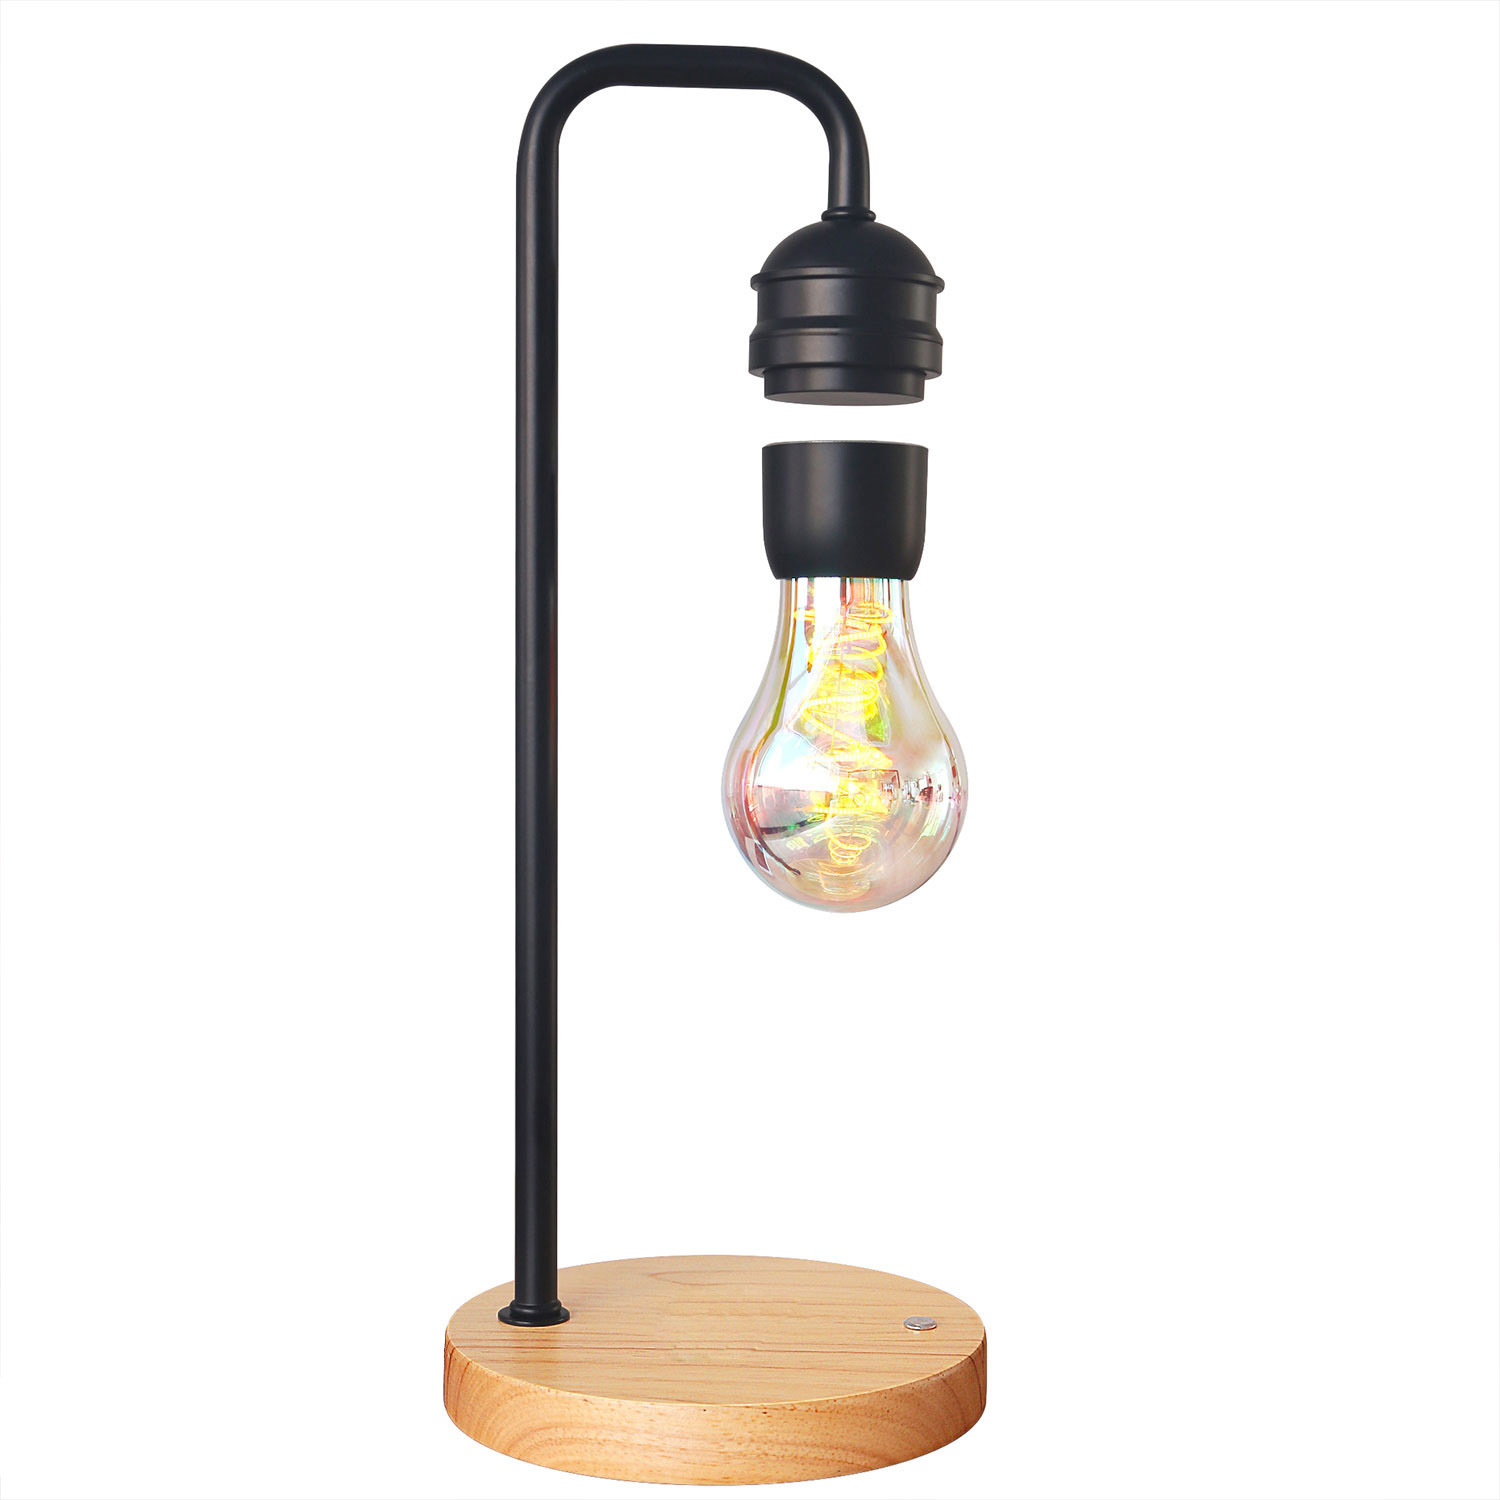 Magnetic Suspension Bulb Creative Table Lamp Decoration Hanging Black Technology Office Home Gift Atmosphere Glowing Night Lights